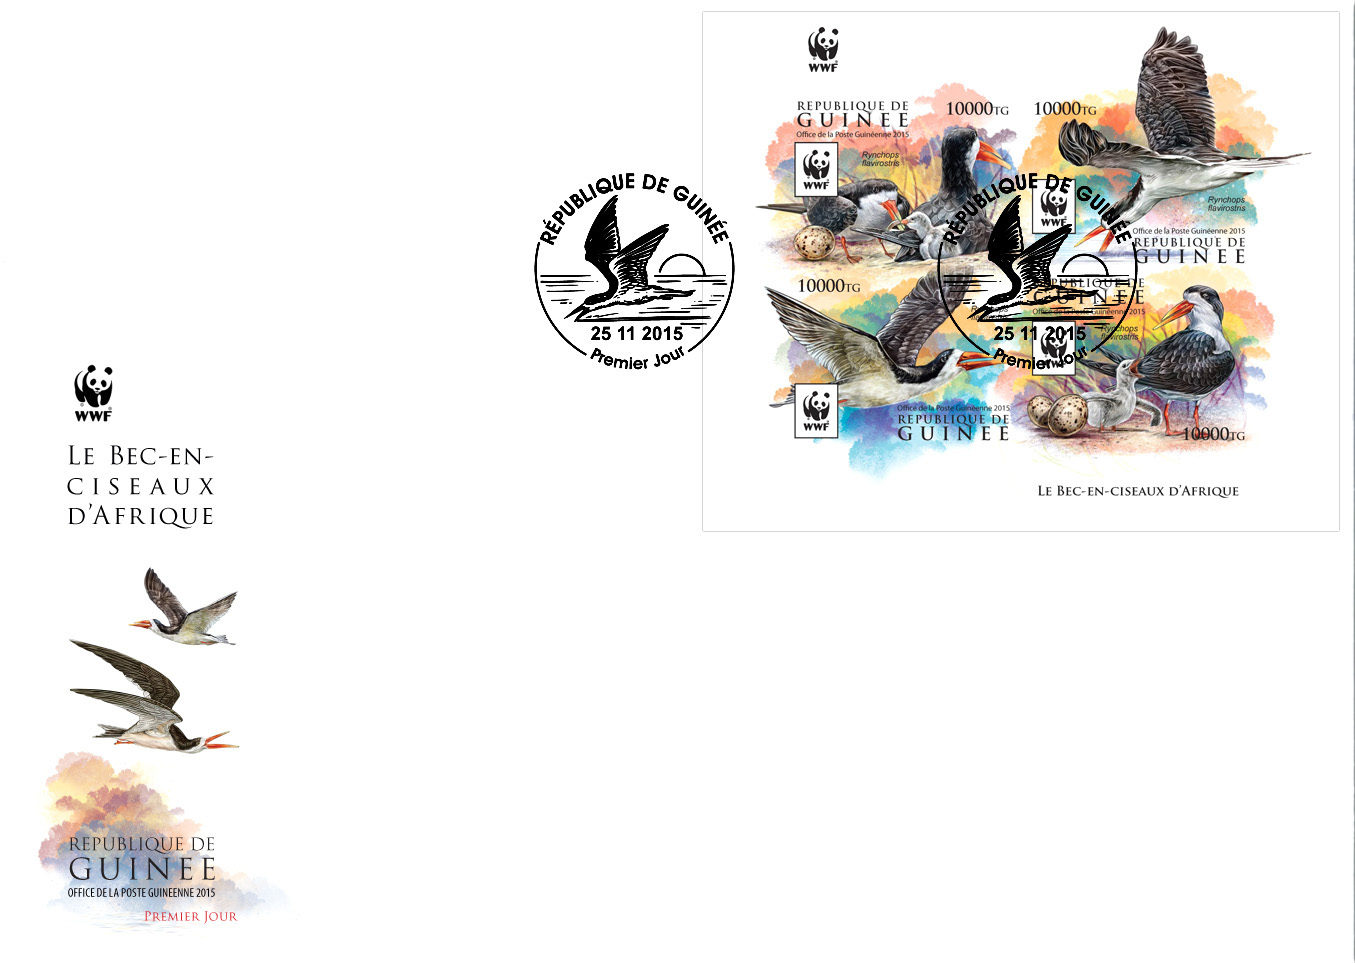 WWF – Skimmer (FDC imperf.) - Issue of Guinée postage stamps